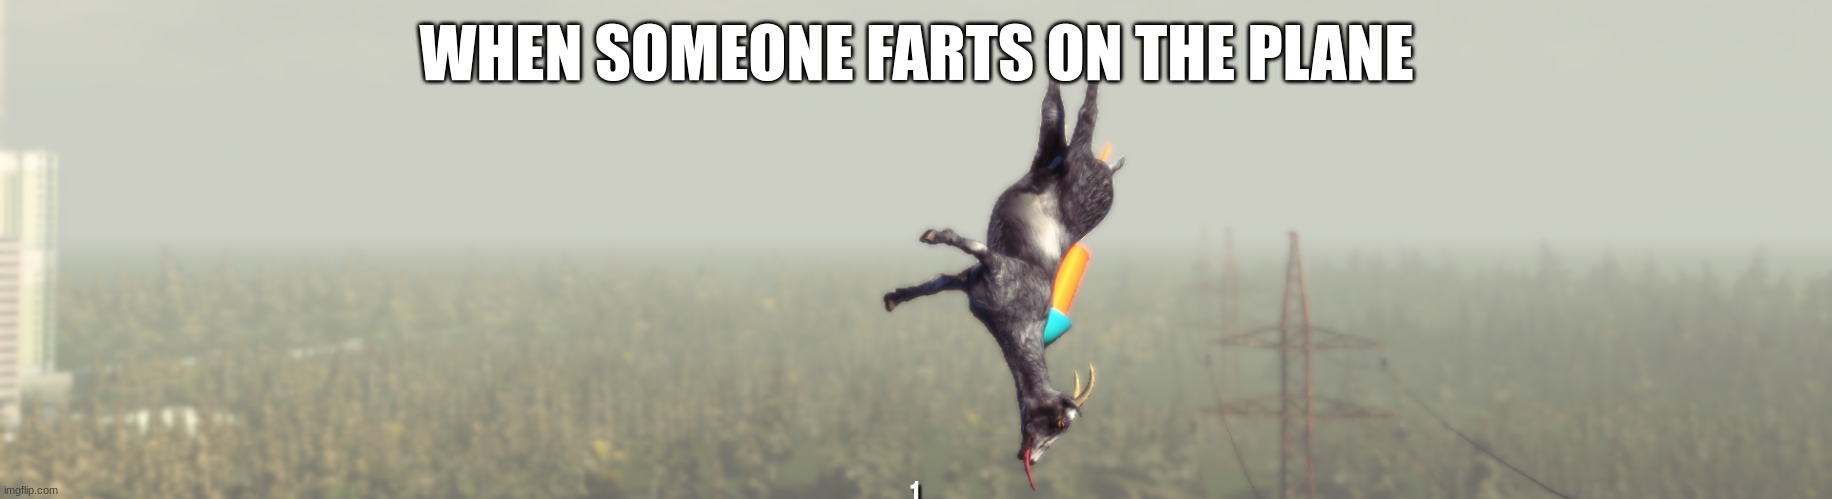 cringe | WHEN SOMEONE FARTS ON THE PLANE | image tagged in flying goat from goat sim,memes,goat,plane,fart,falling | made w/ Imgflip meme maker